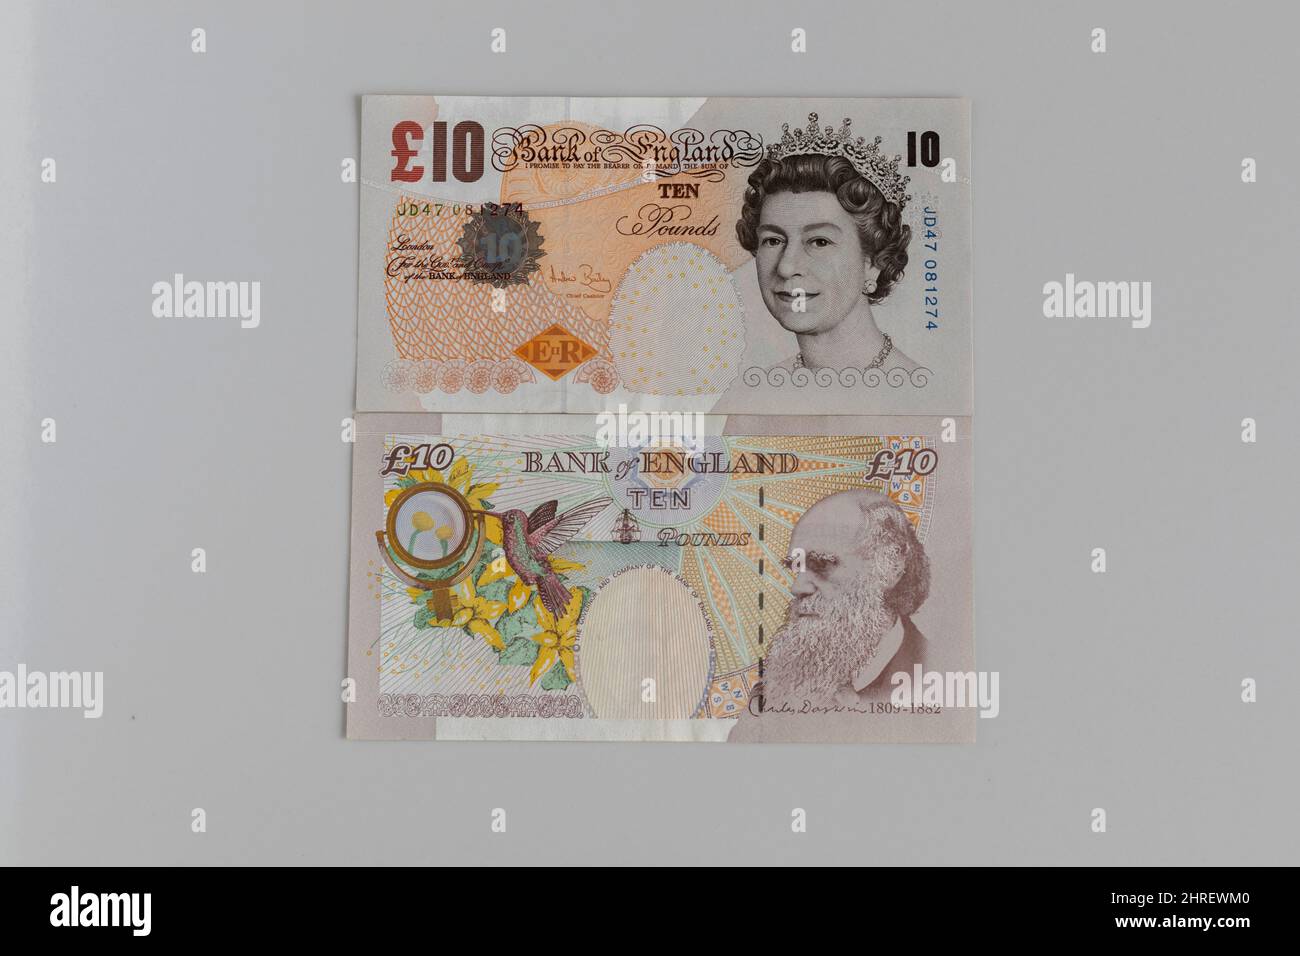 Bank of England £10 tenner note with front and back two sided note Stock Photo